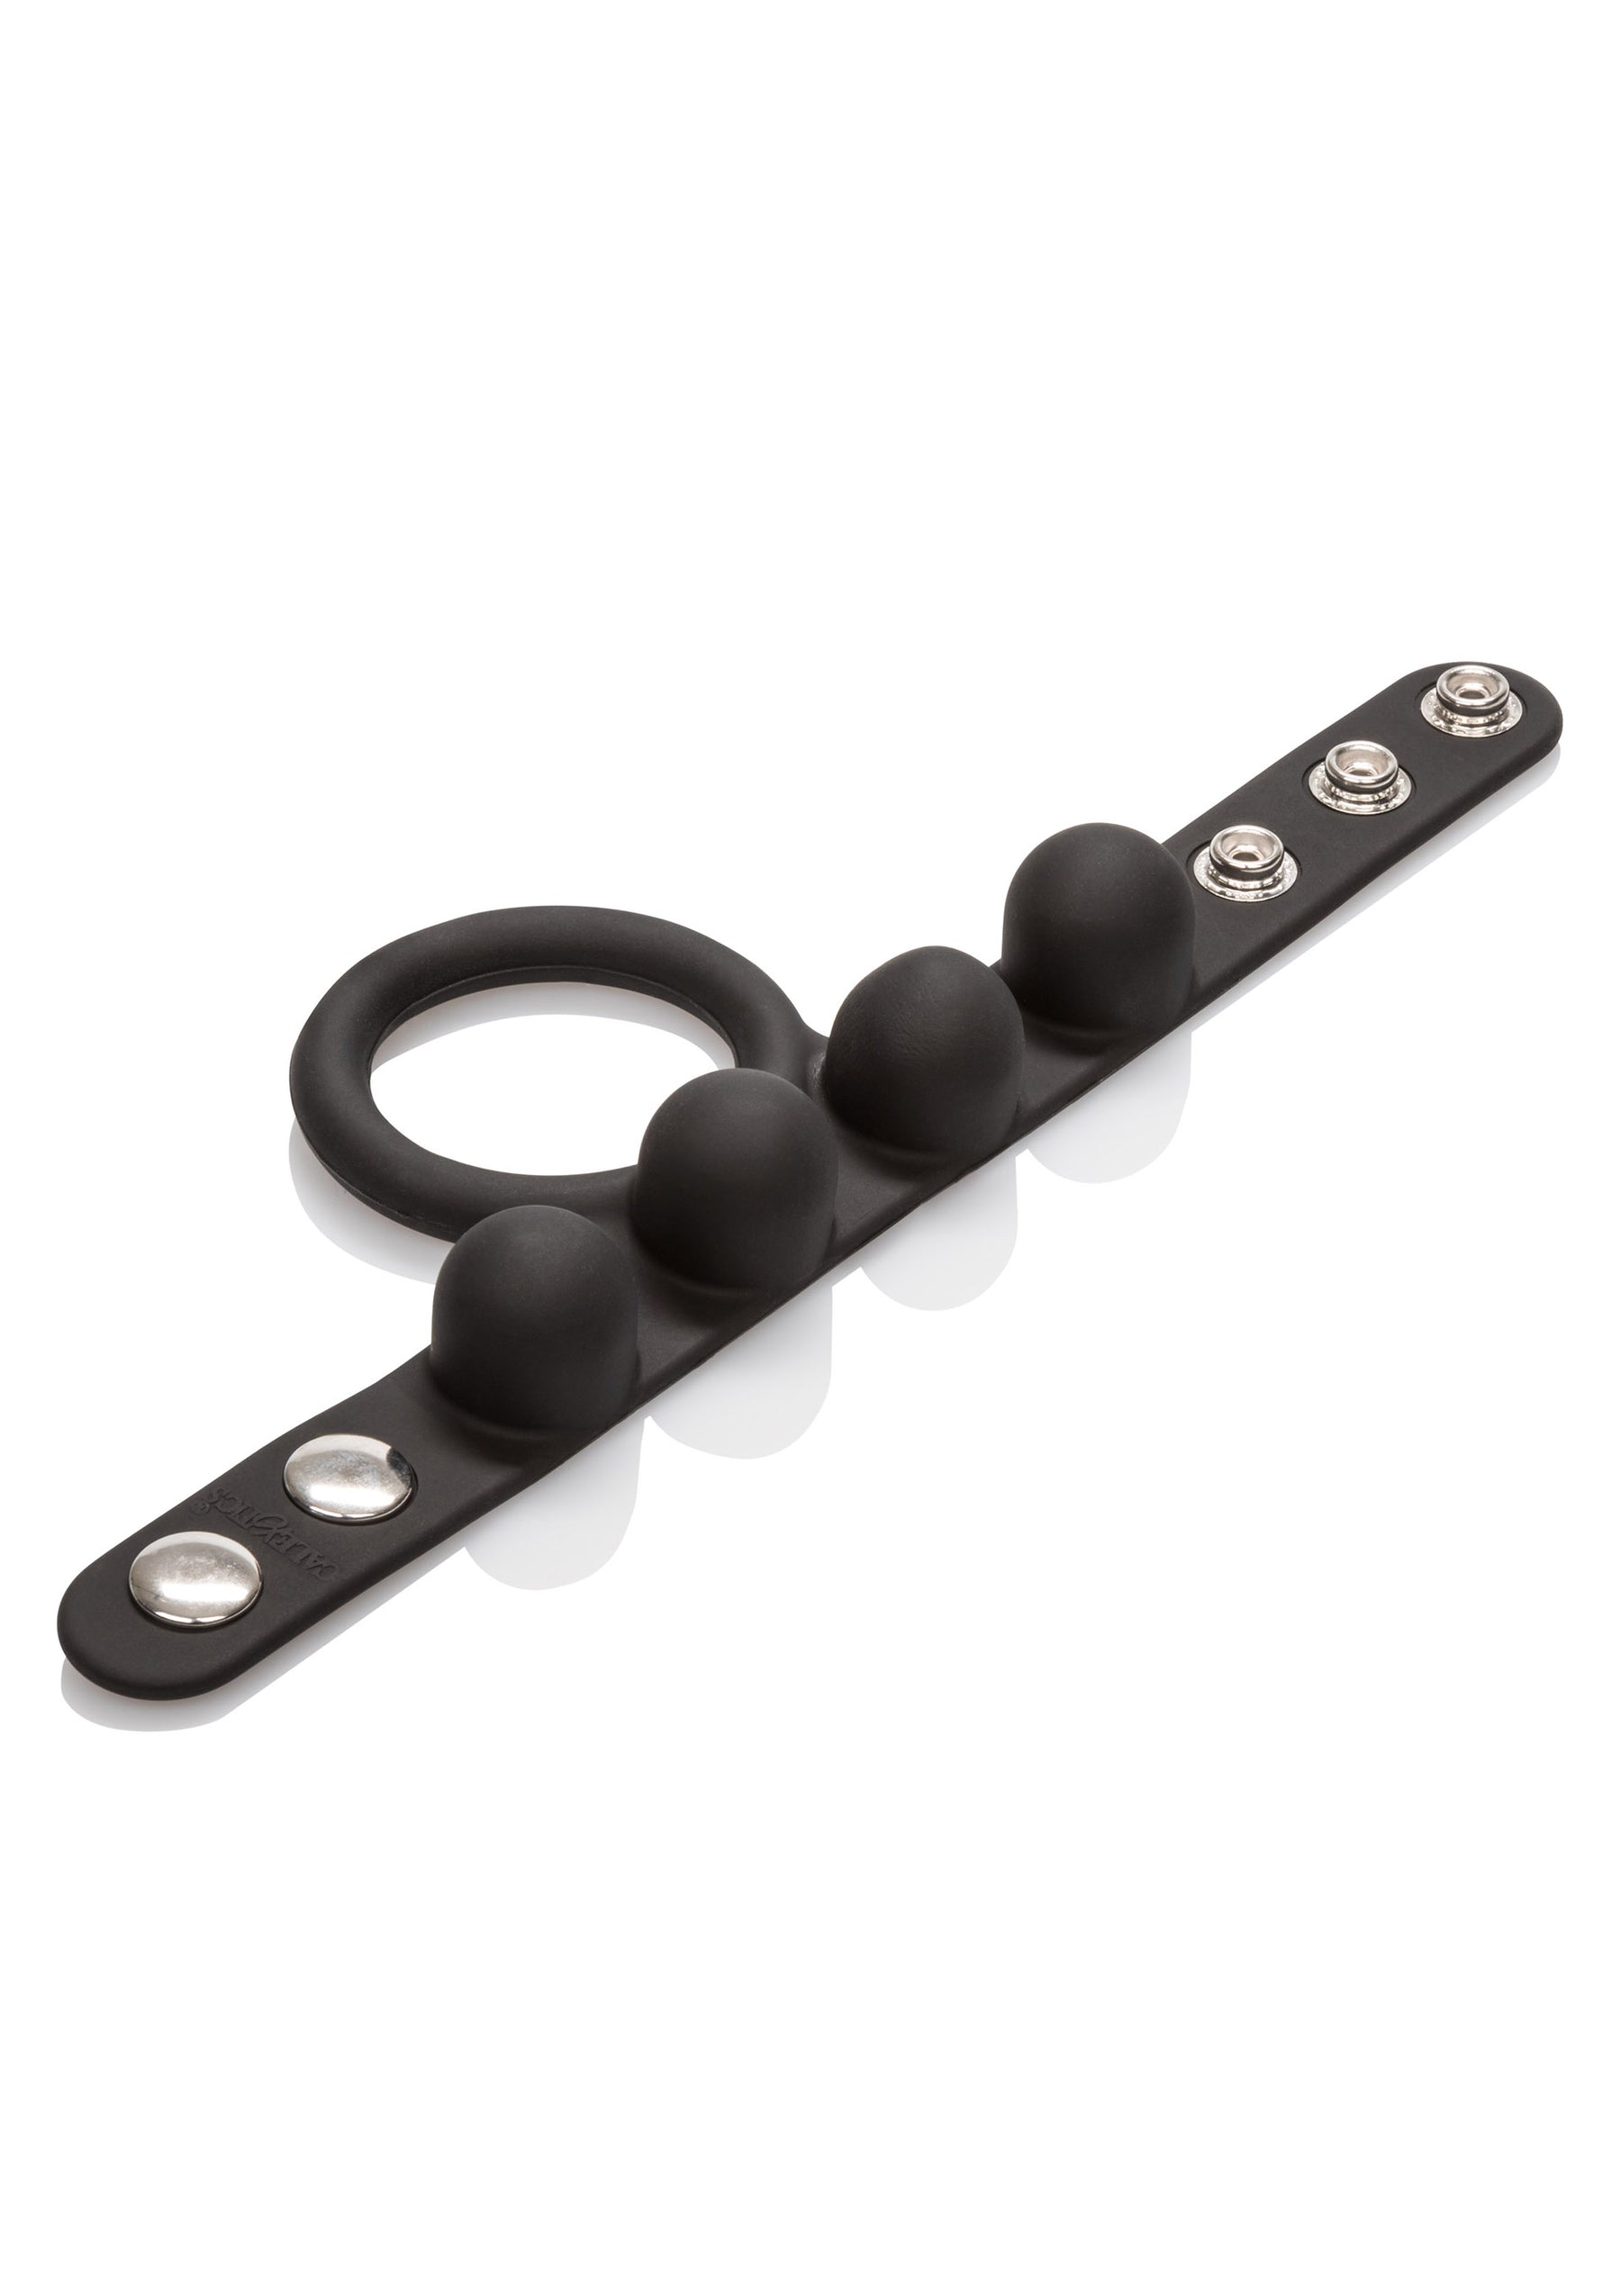 C-Ring Ball Stretcher Large-w